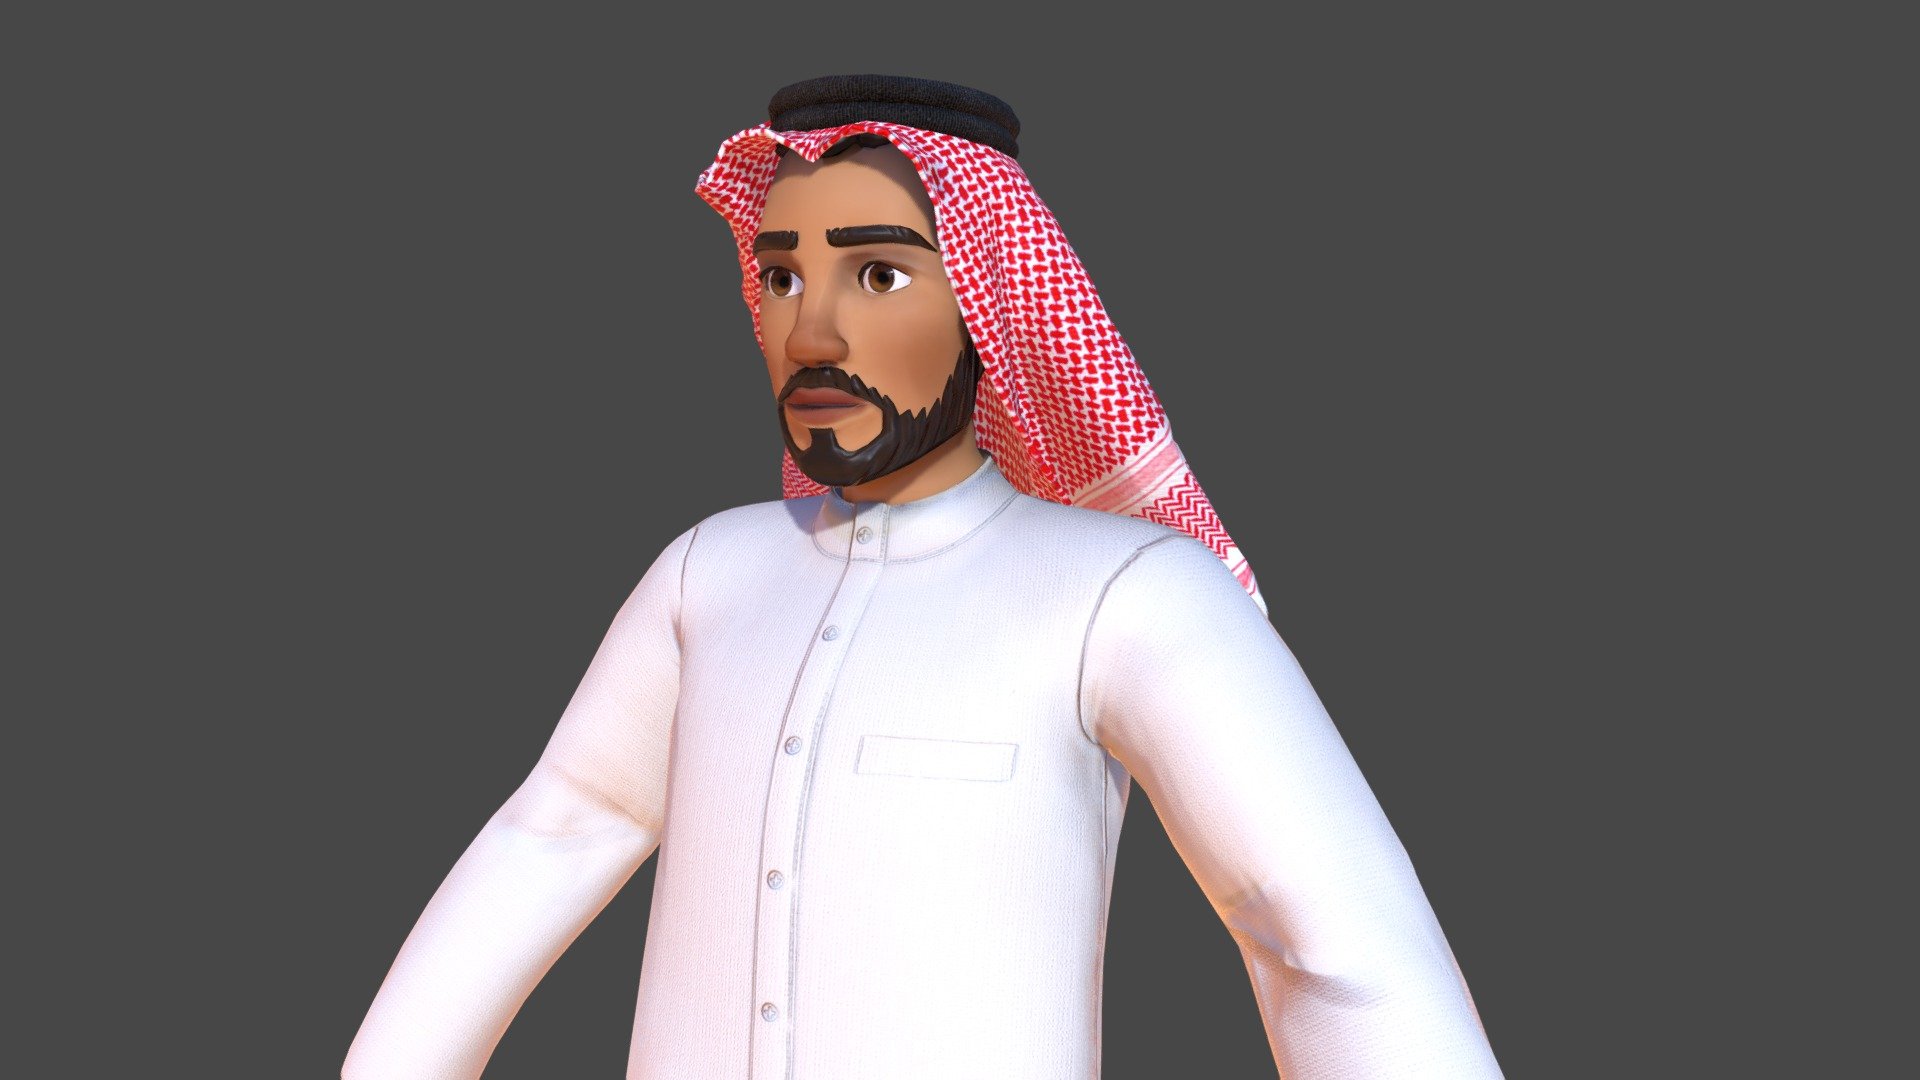 A fully rigged stylized Arabi man in real-world scales.
Created using Zbrush and Maya software, textured using substance painter and photoshop, and rigged using Blender.
This character has optimized textures and topology for use in games, movies, videos, and mobile apps. This model contains a full-body model, separate Hair and beard also separate clothes ( Jilbab, Guthra, Egal), and separate teeth and tongue.Rigging :
Advanced facial rig to achieve a variety of facial expressions.
The body rigging also has many advanced features.

files available for download :
My portfolio:
https://www.behance.net/gallery/166129993/Saudi-Arabi-man-character - Arabi Man Saudi Rigged - 3D model by DinaMousa 3d model